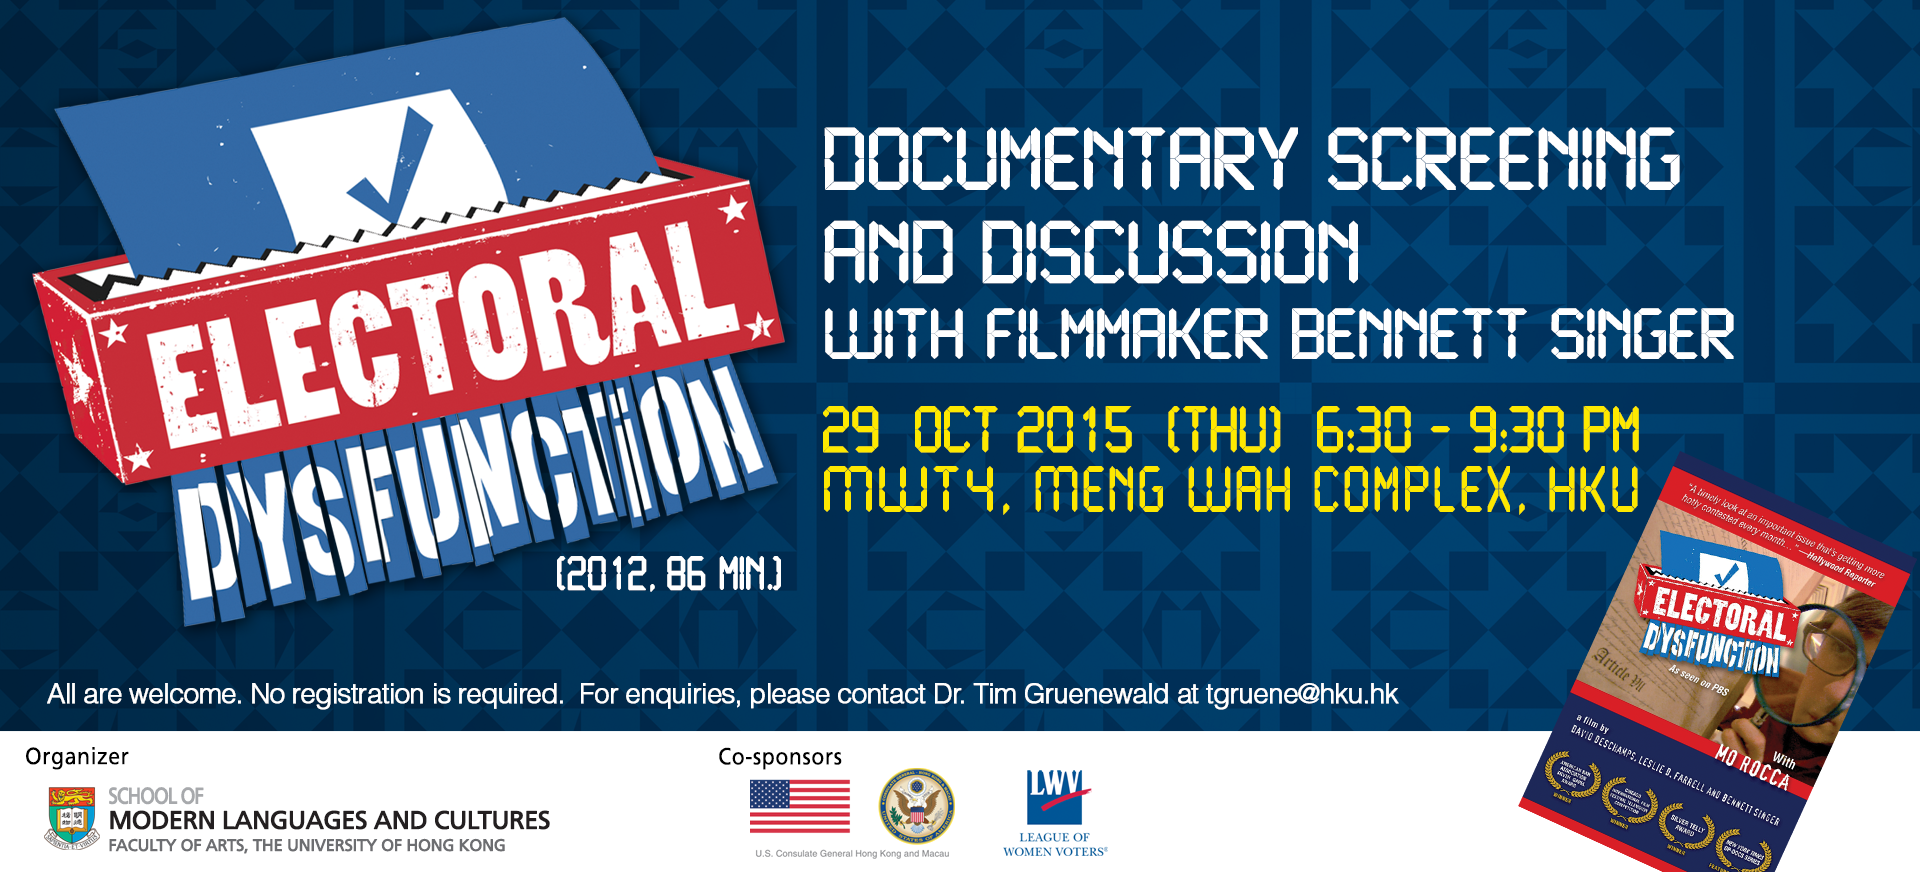 Electoral Dysfunction: Documentary Screening and Discussion With Filmmaker Bennett Singer